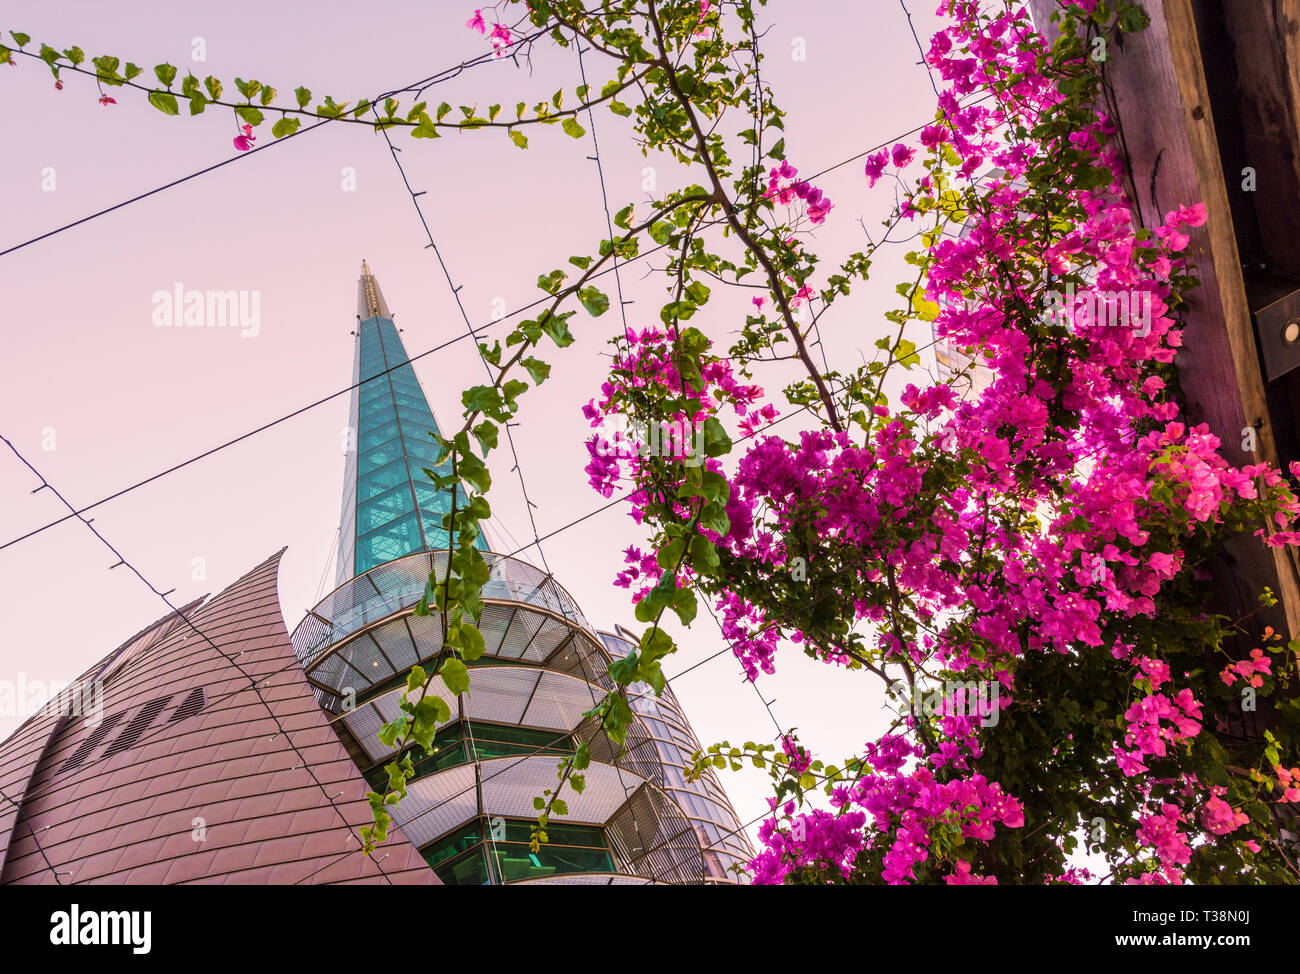 Sunset over The Swan Bell Tower and bougainvillea in Barrack Square, Perth, Western Australia Stock Photo